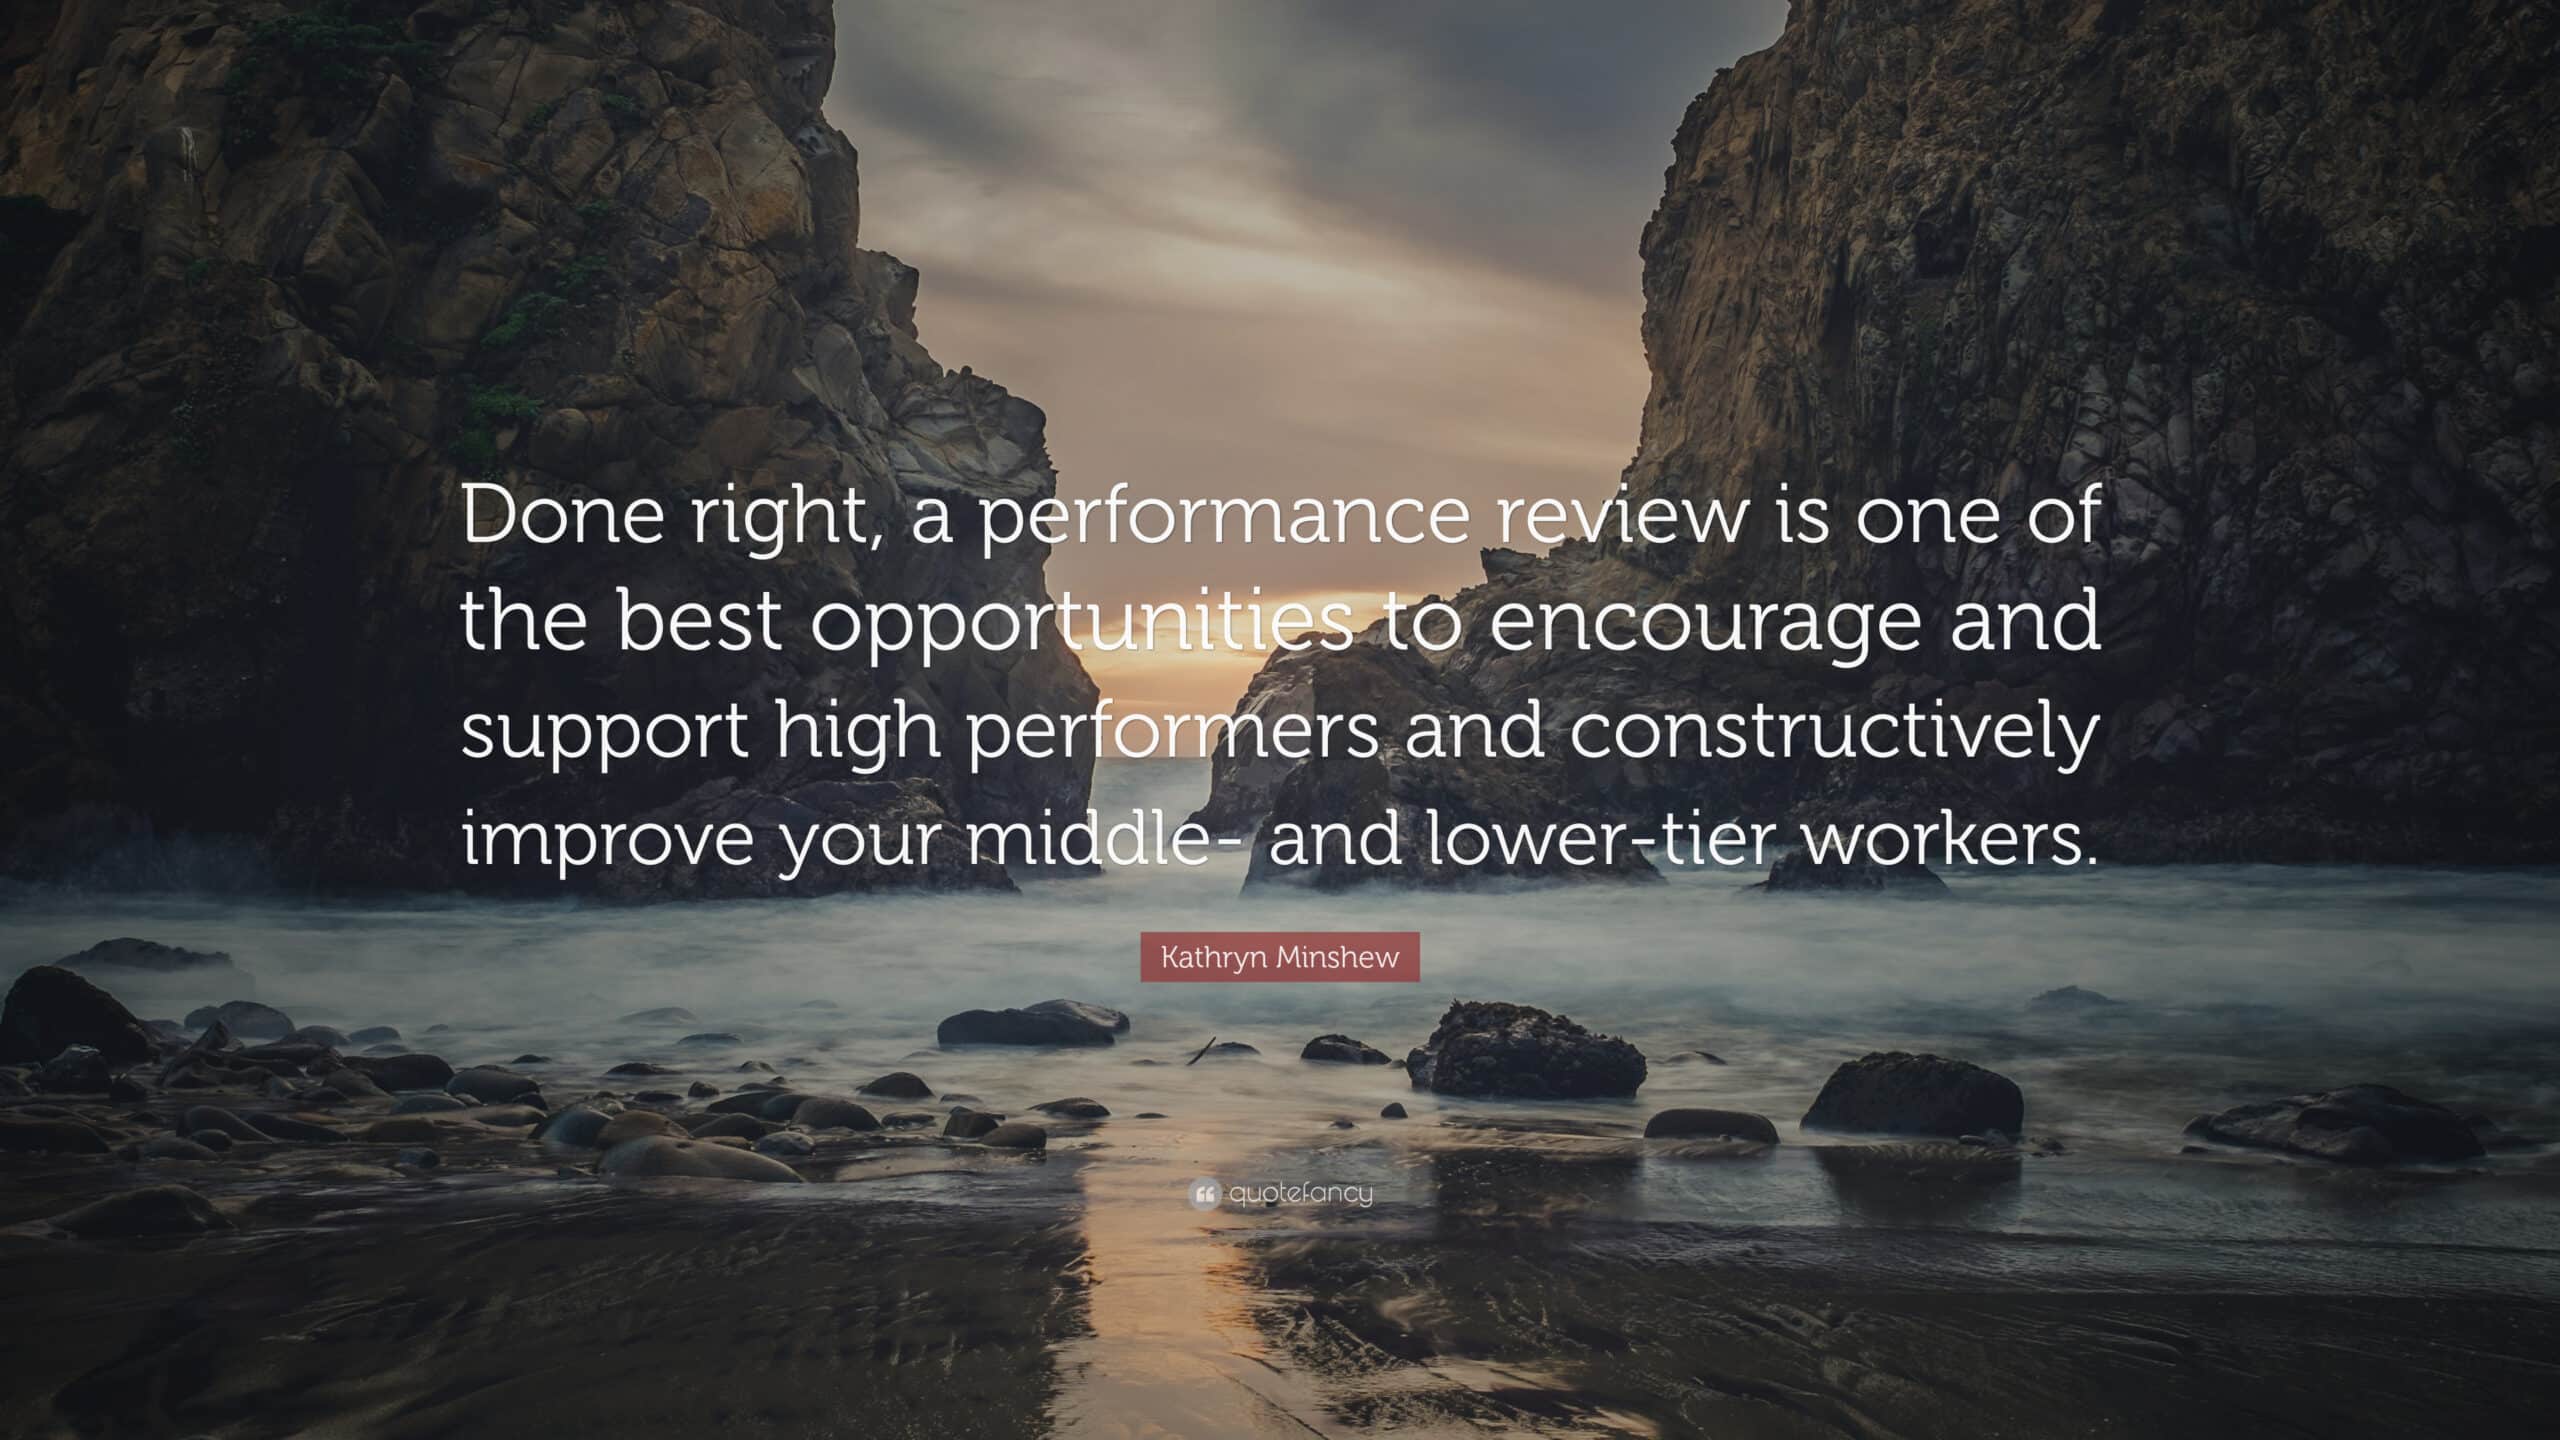 Effective performance management can feel daunting at first, but it’s a powerful tool.